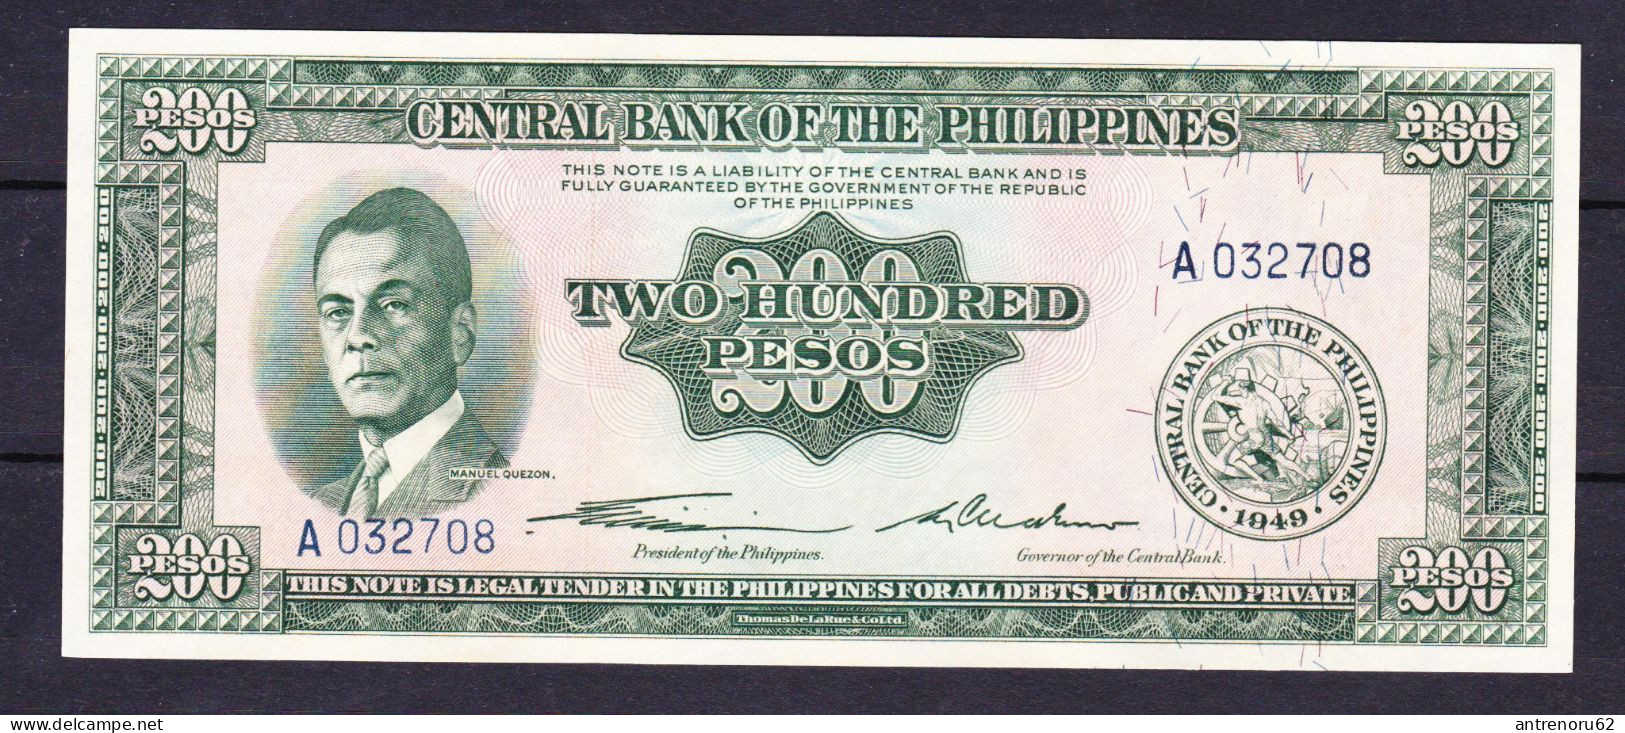 BANKNOTES-1949-PHILIPPINES-200-UNC-SEE-SCAN - Philippines